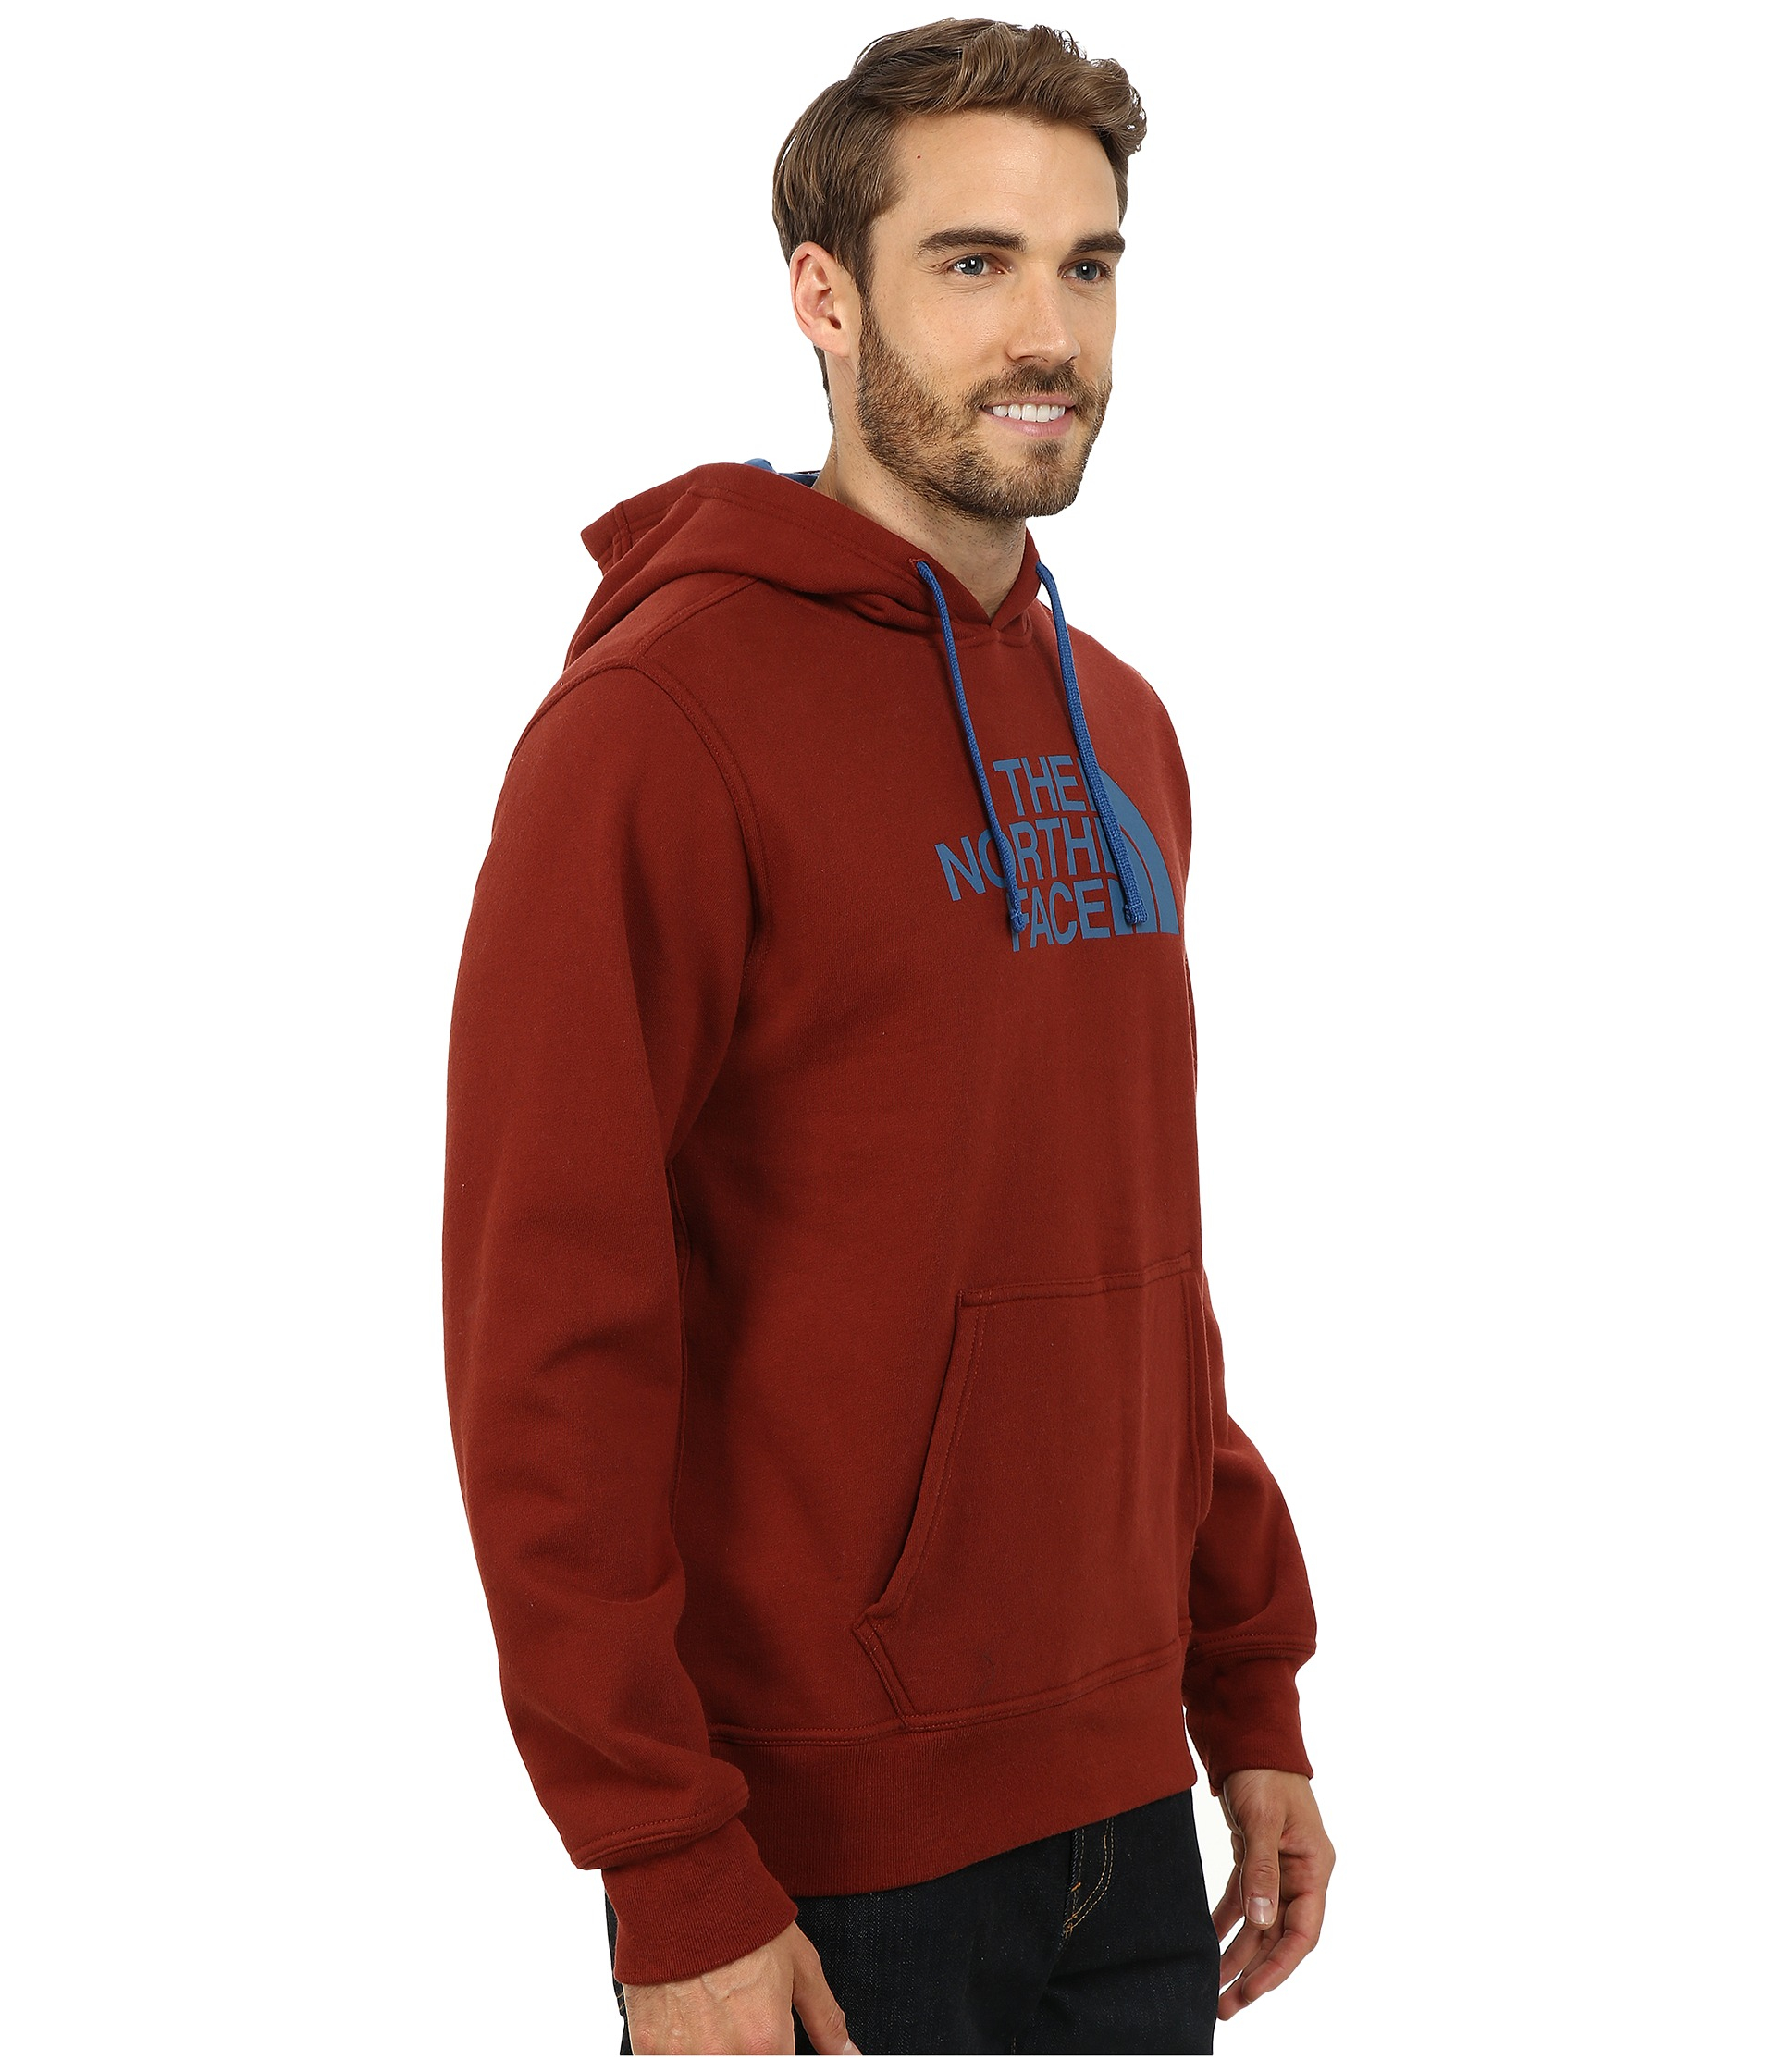 Lyst - The North Face Half Dome Hoodie in Red for Men